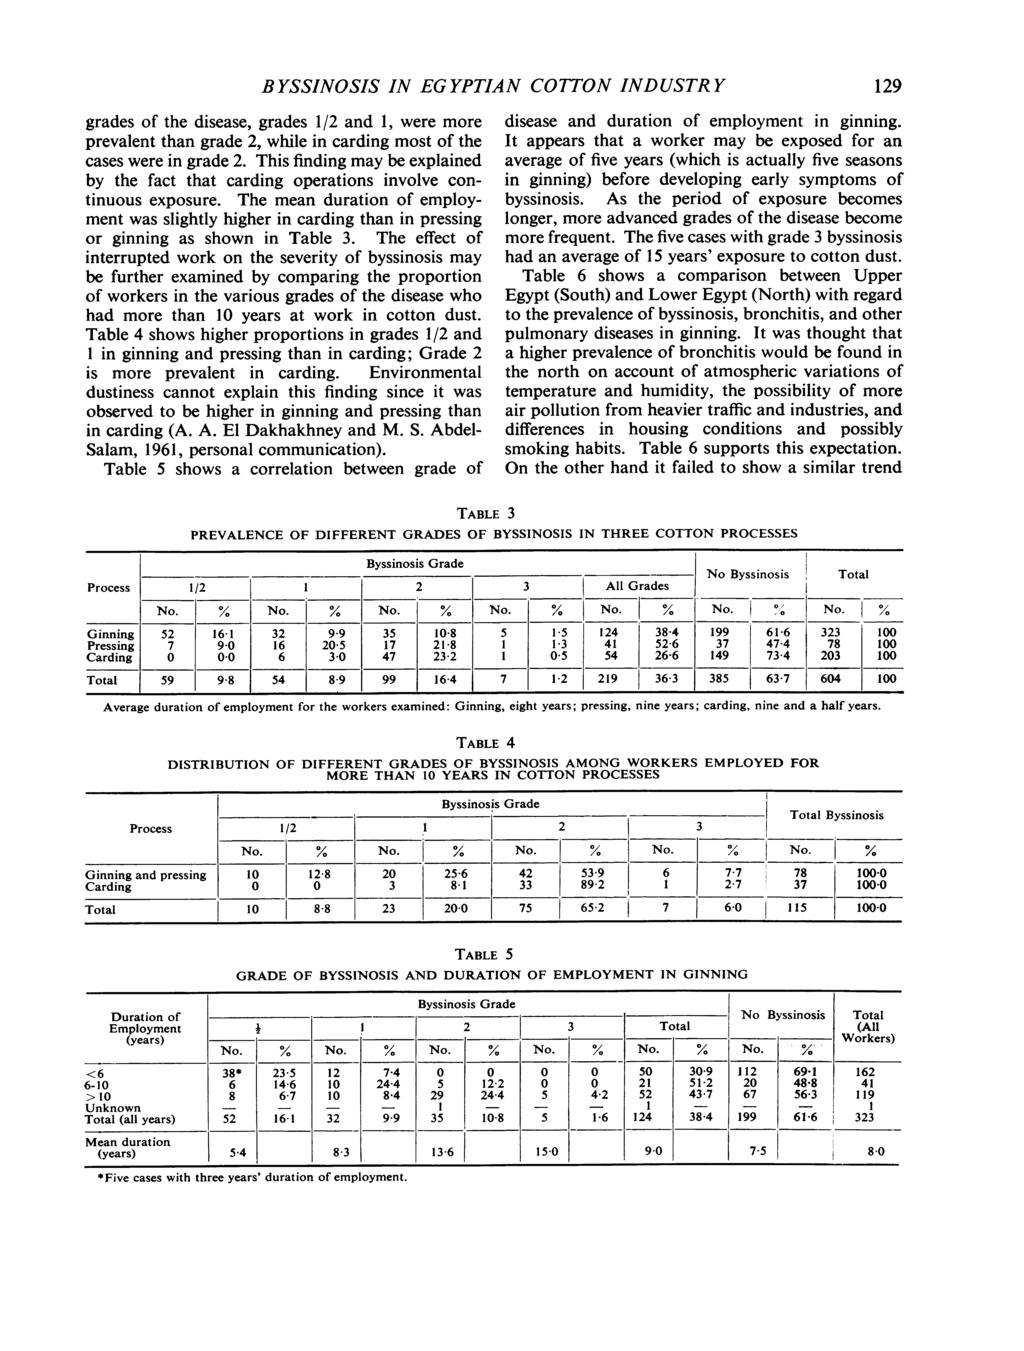 B YSSINOSIS IN EGYPTIAN COTTON INDUSTRY grades of the disease, grades 1/2 and 1, were more prevalent than grade 2, while in carding most of the cases were in grade 2.